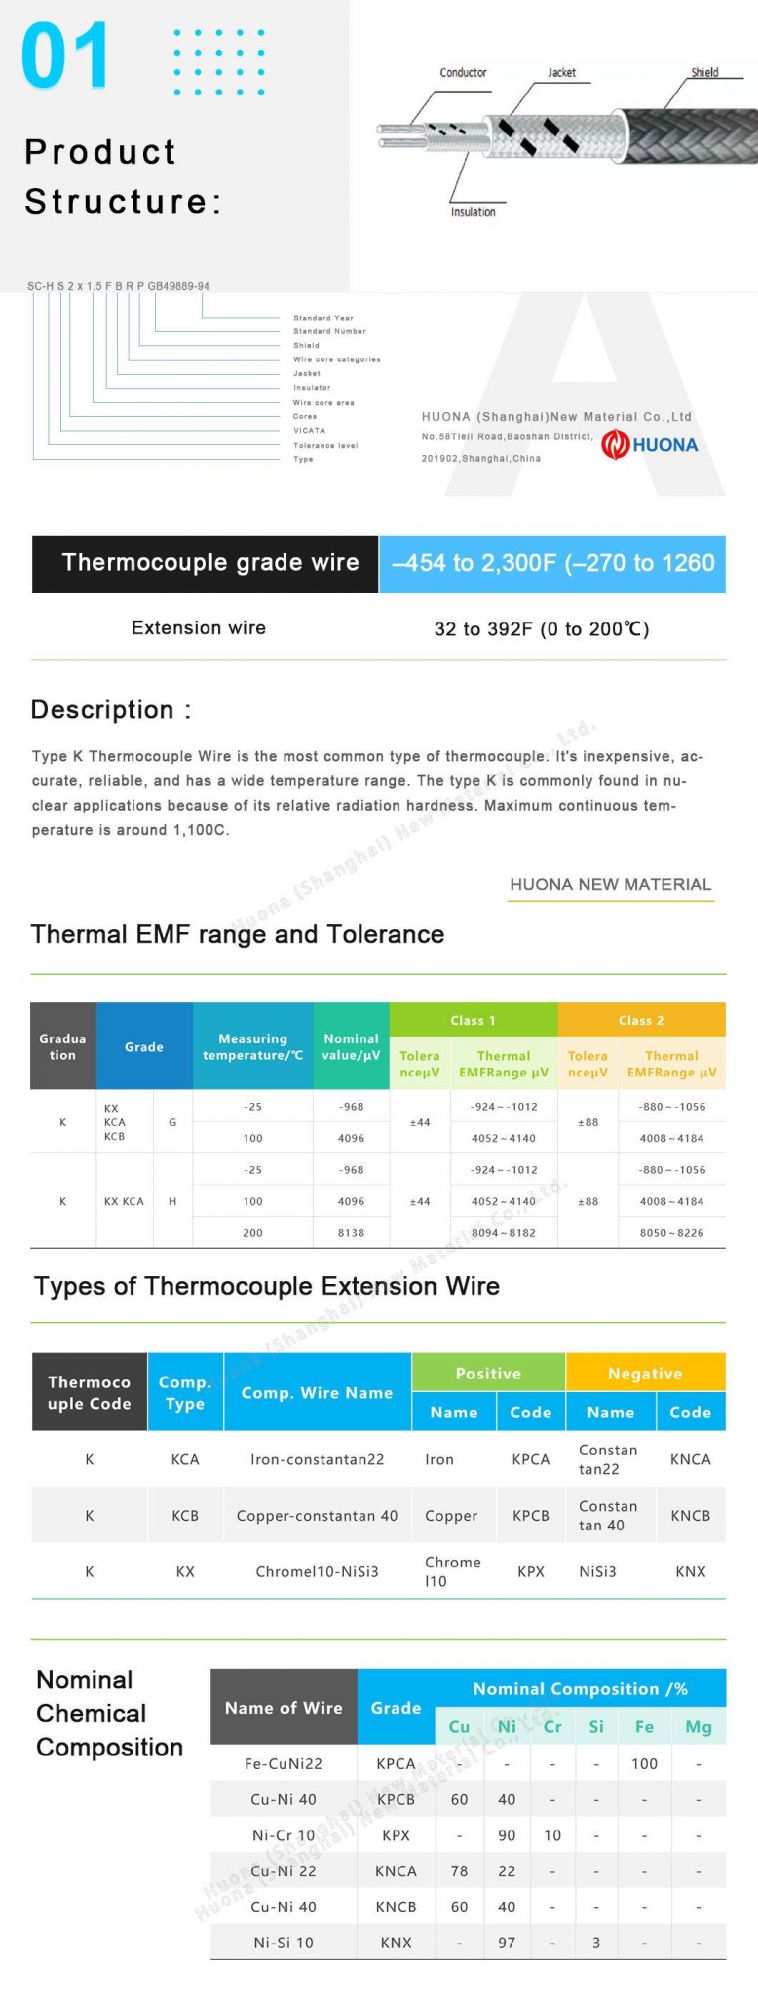 Type K Thermocouple Cables / Wire with 1200 Max Temper Fiberglass Insulated